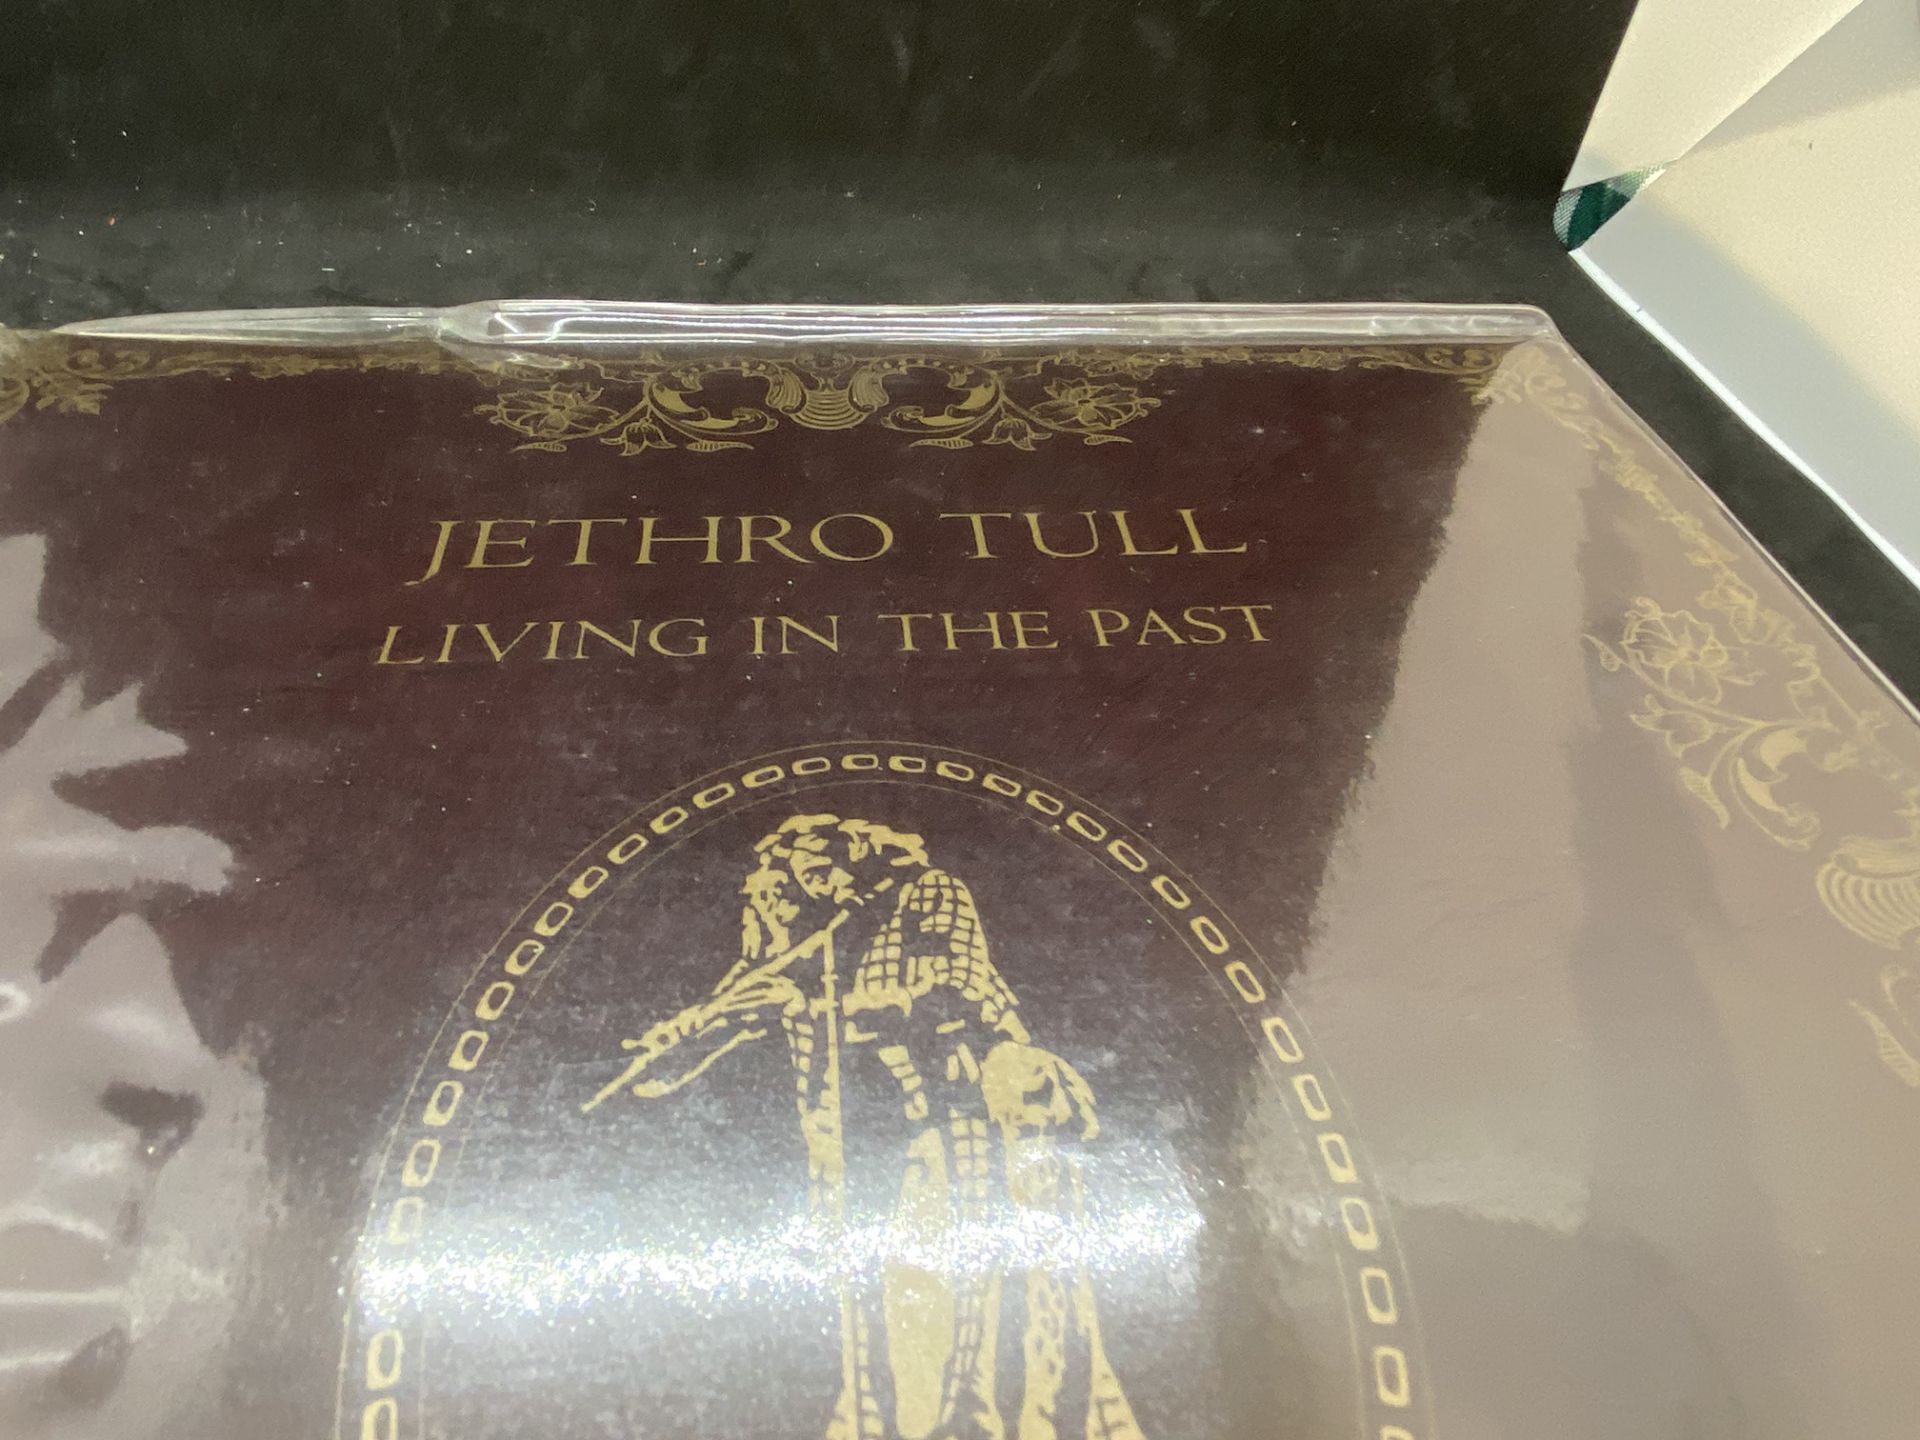 JETHRO TULL - LIVING IN THE PAST ALBUM - FROM PRIVATE COLLECTION - Image 2 of 36